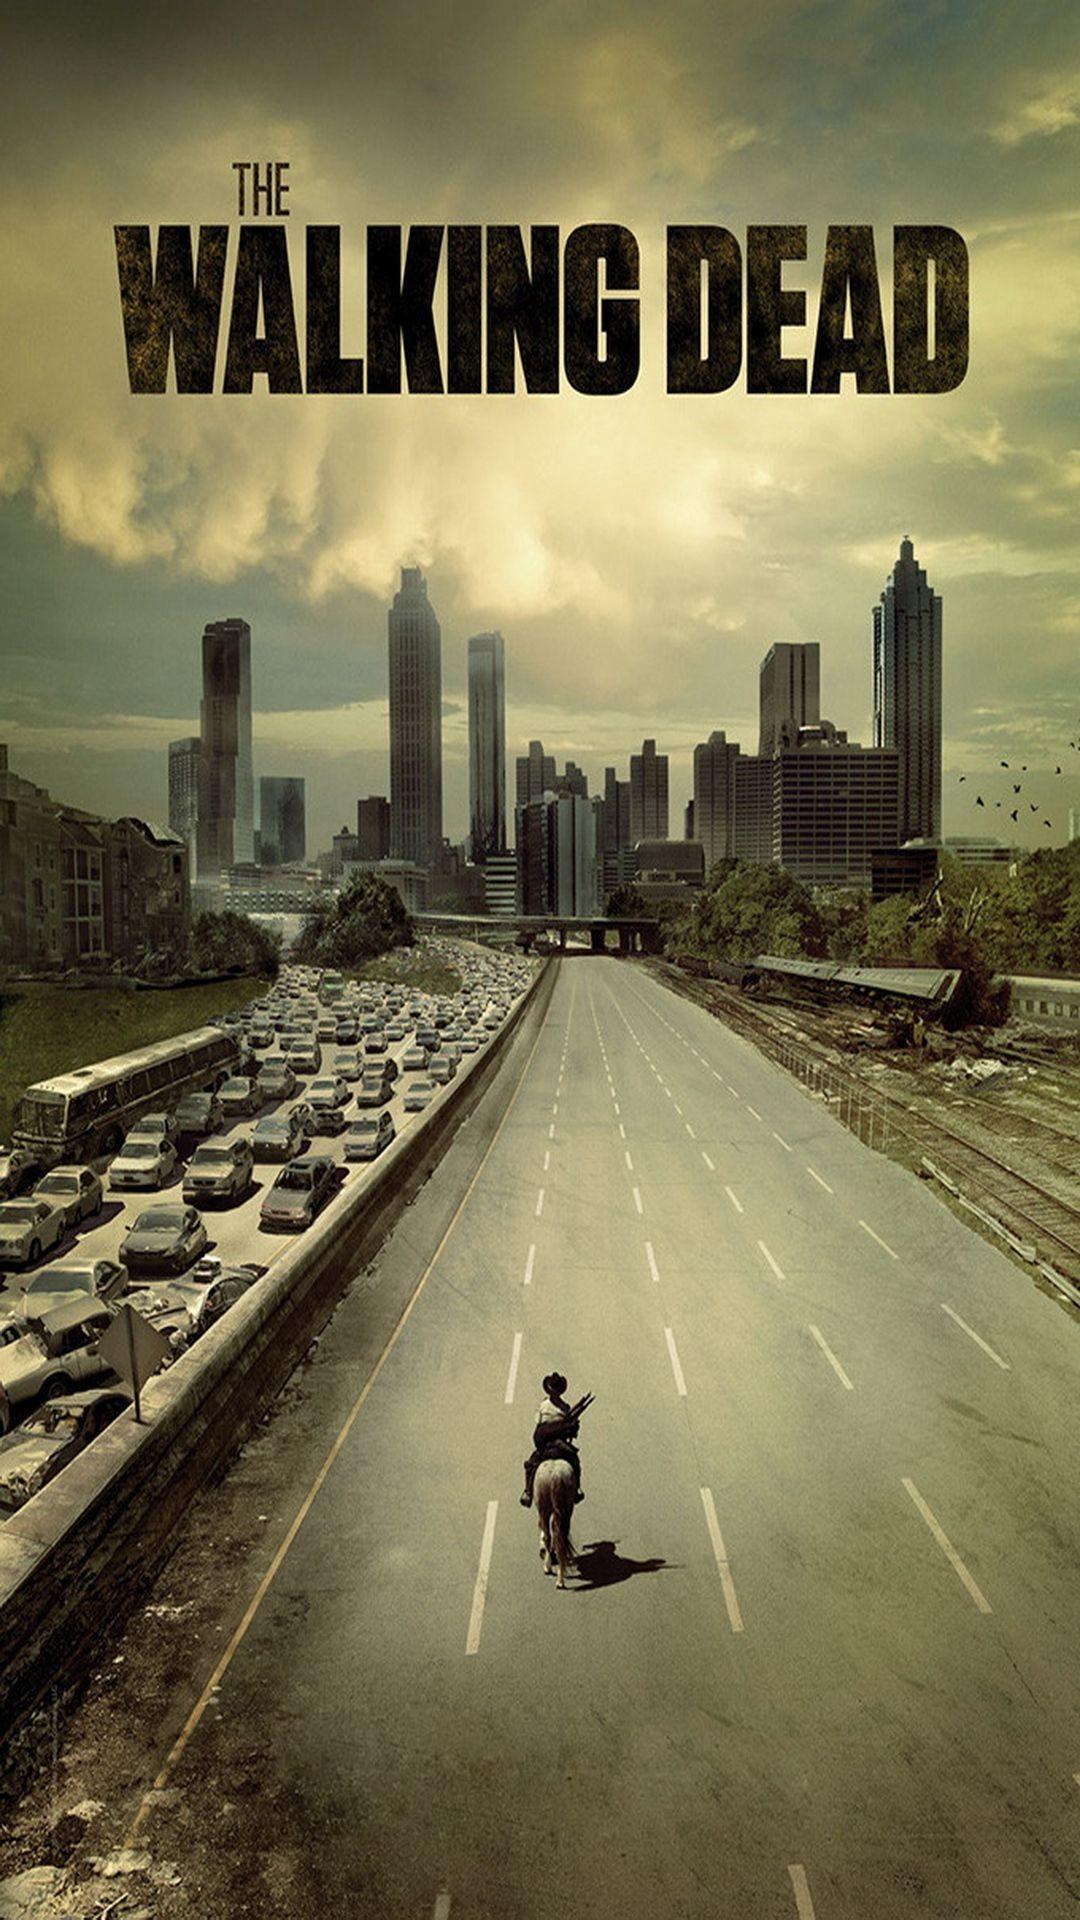 The Walking Dead 7 Wallpaper background picture